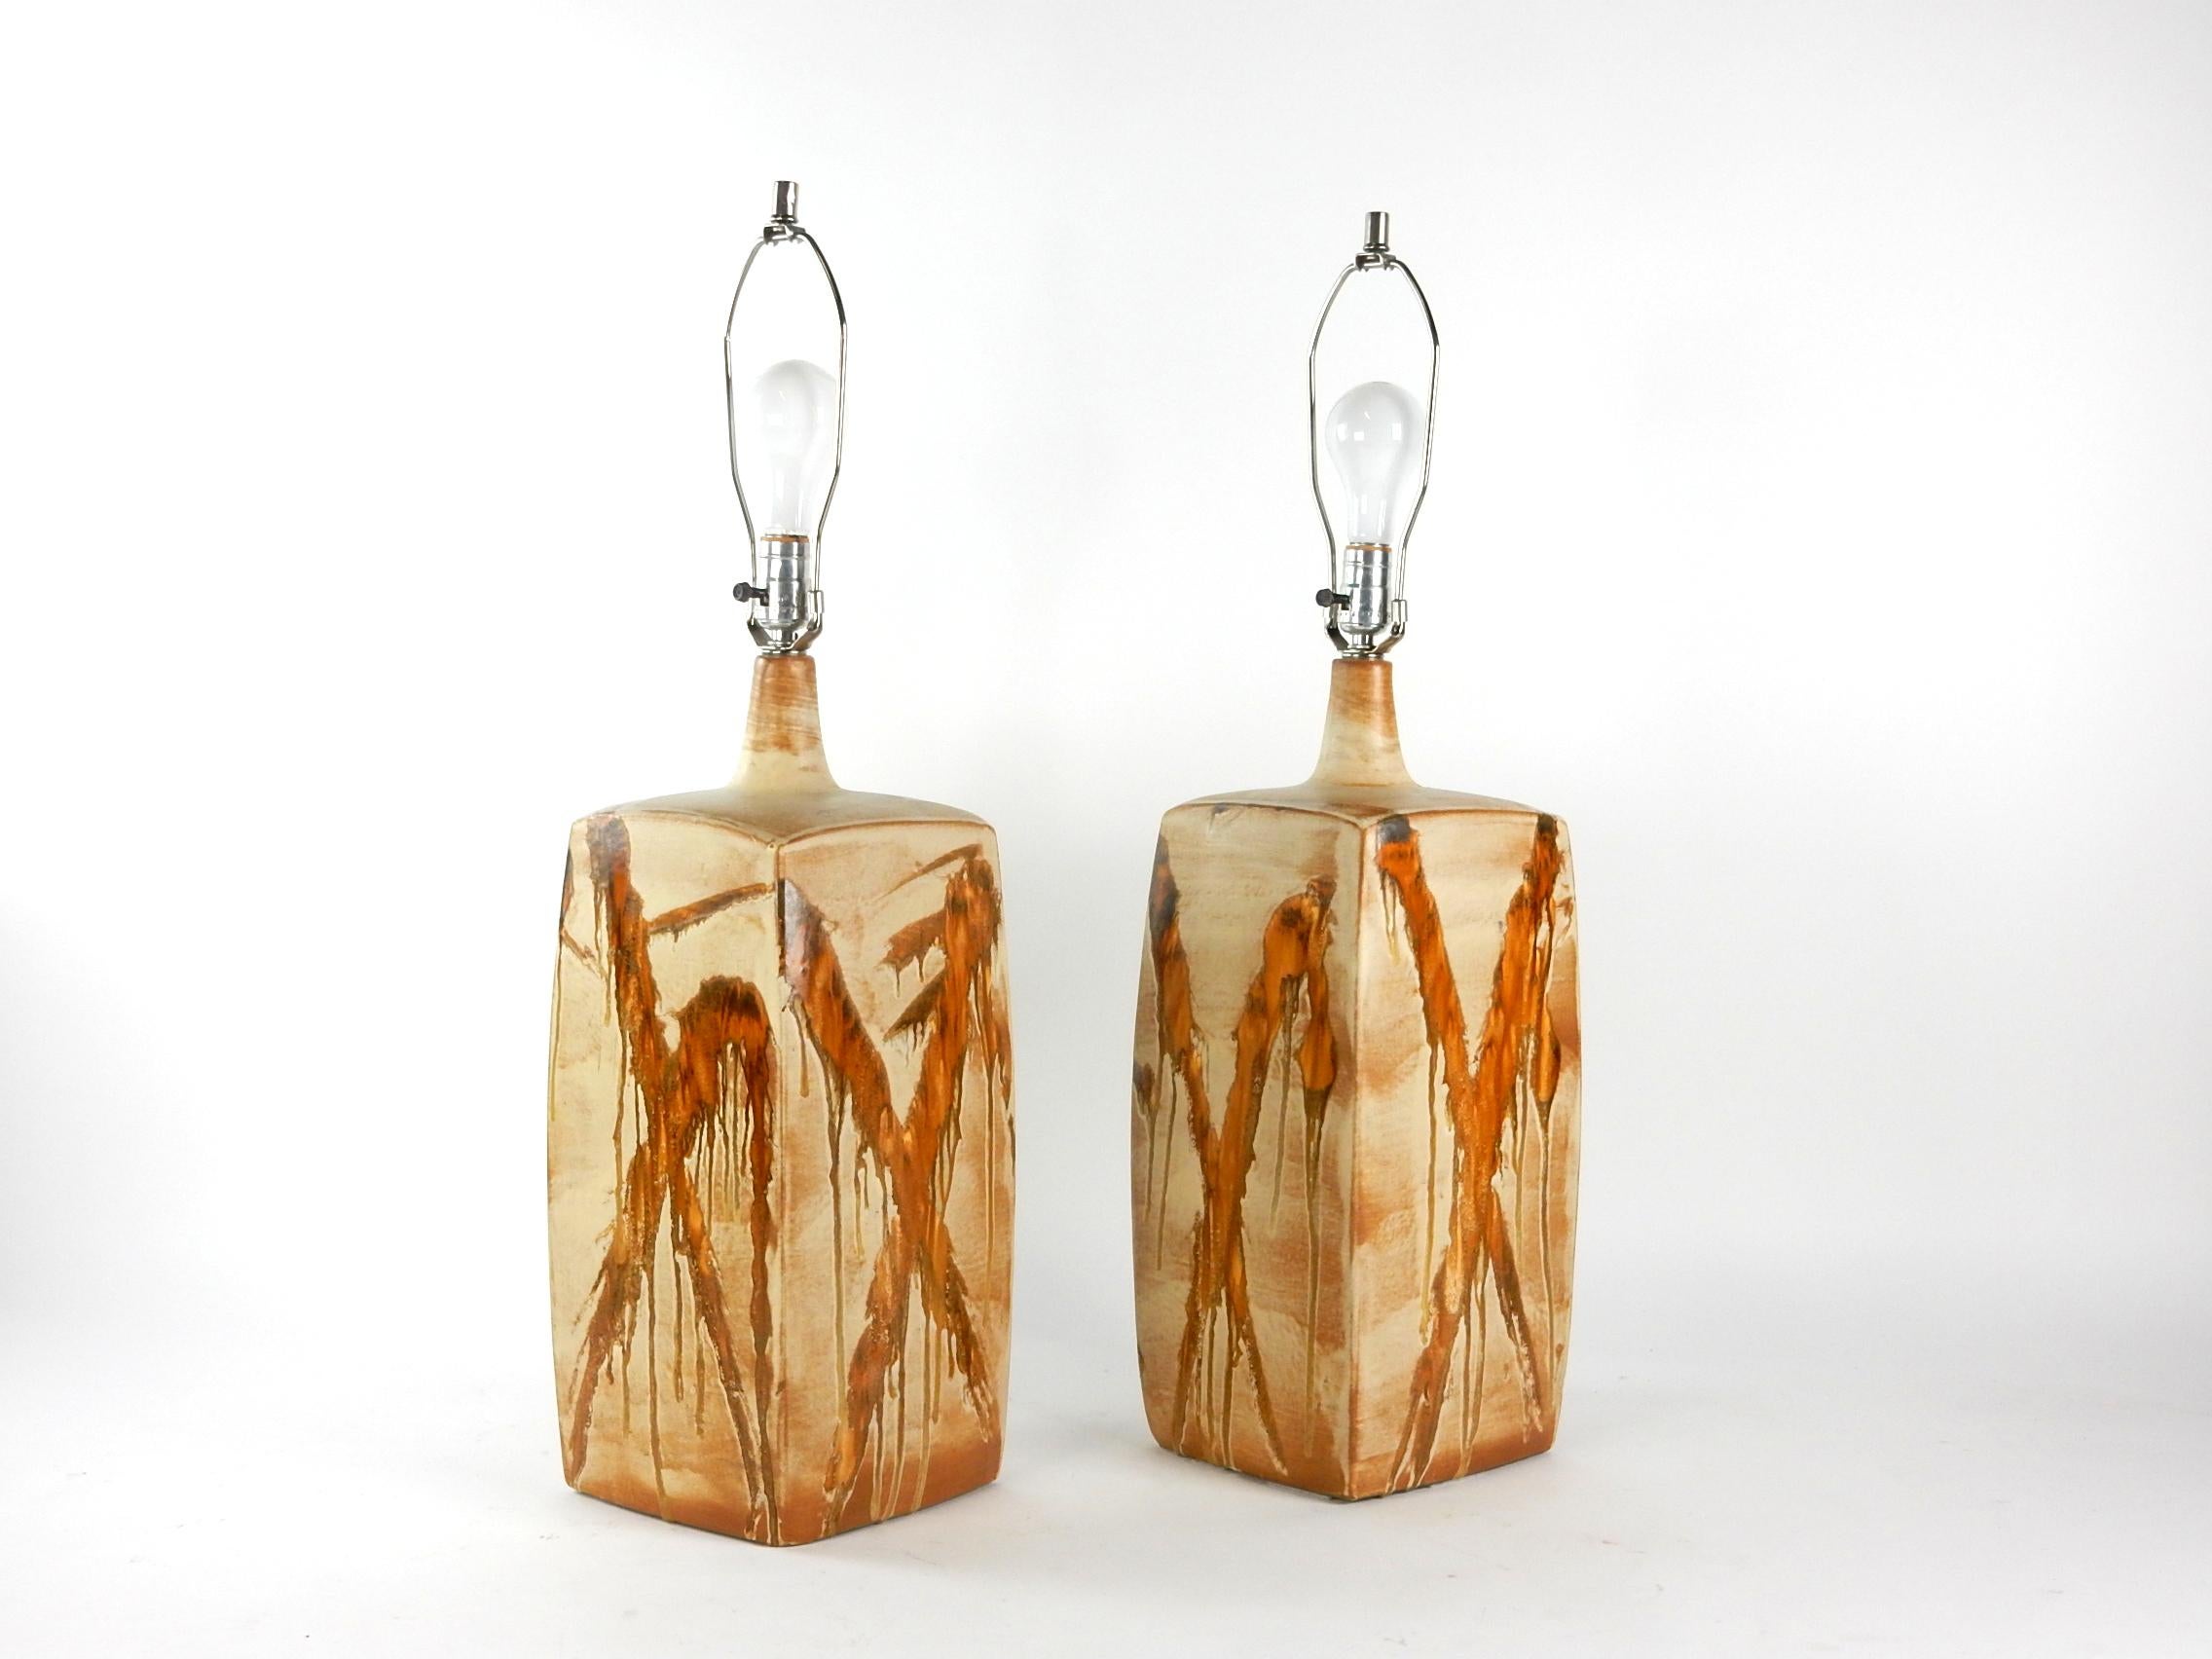 A pair of large boxy shape ceramic table lamps from the Mid-Century Modern era.
Each with crisscrossing diagonal splashes of caramel and ochre drip glaze over a brown earth tone.
All original with UL wiring and hardware.
The ceramic body of lamps